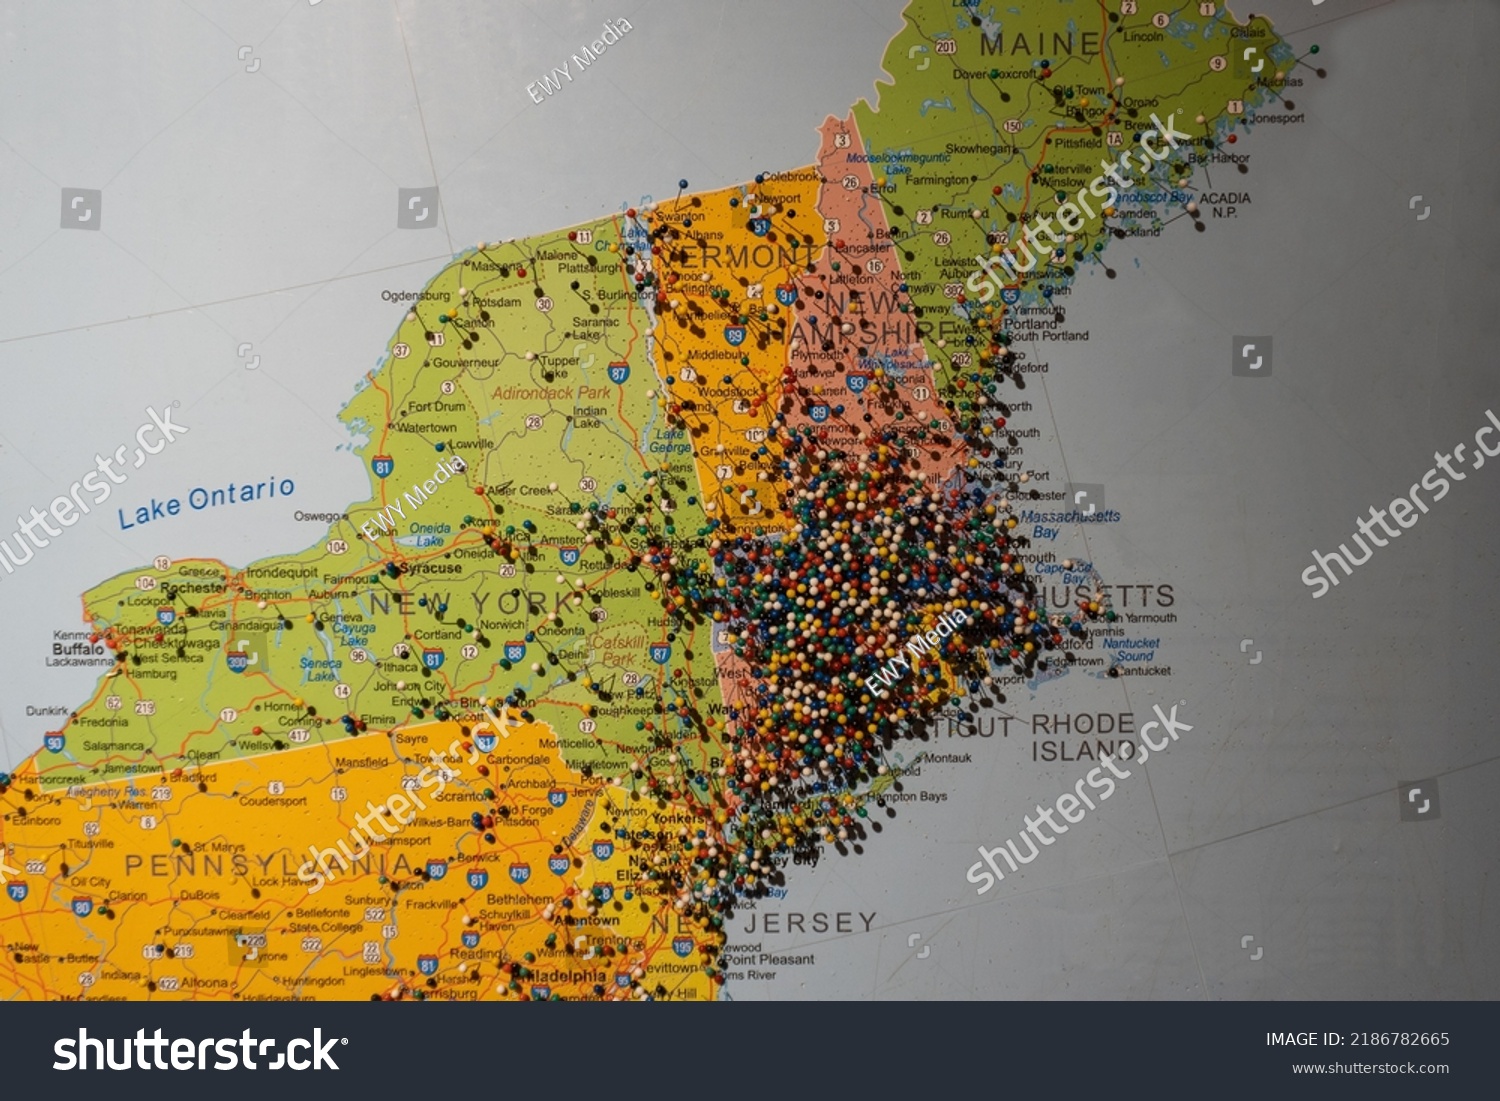 Stock Photo Boston Massachusetts Map Of New England United States With Pins Clustered Around 2186782665 